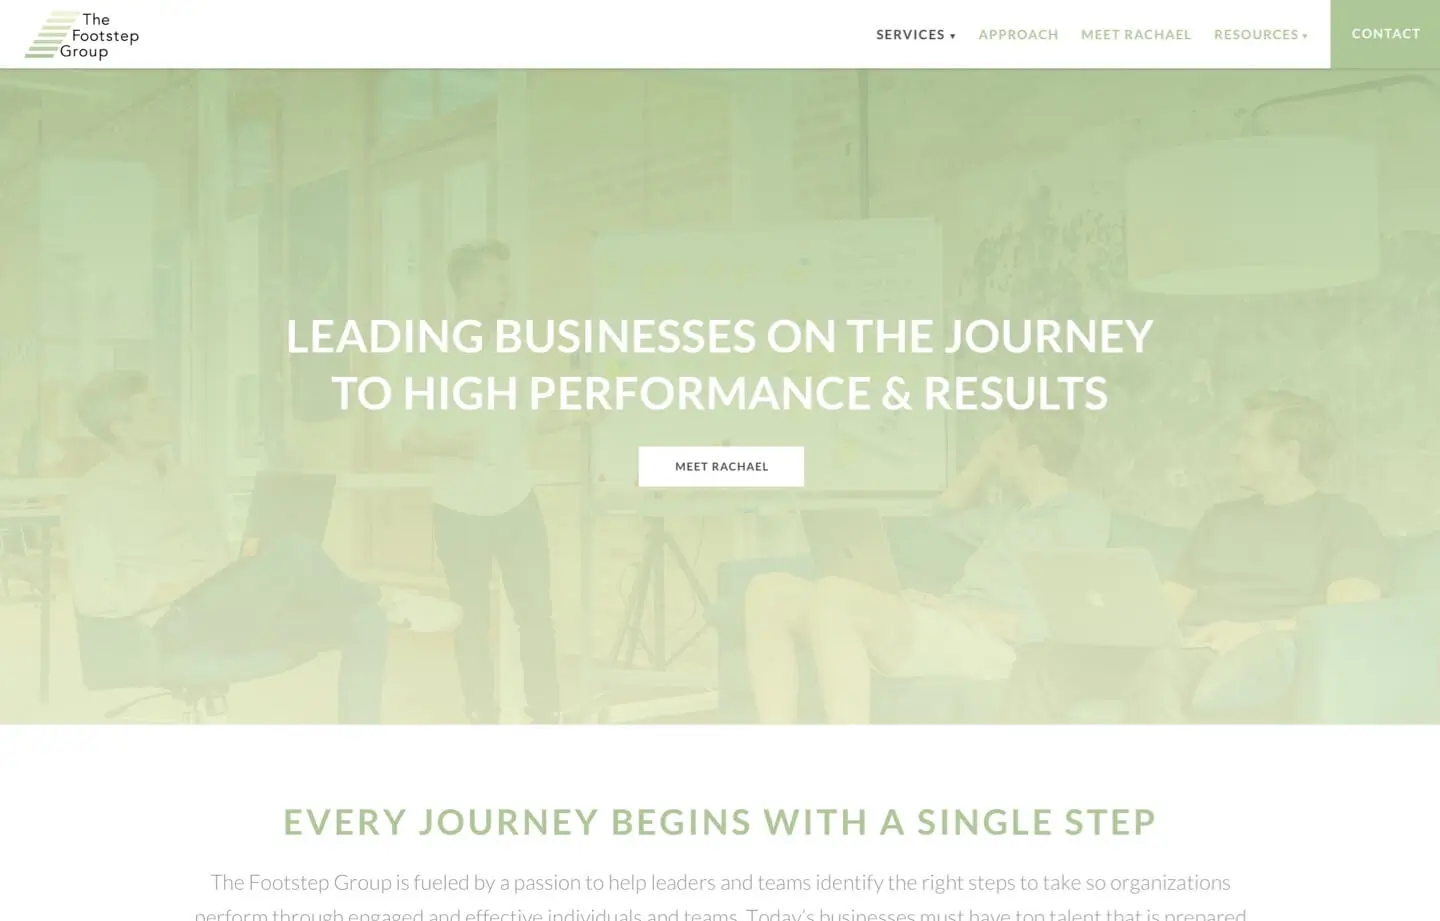 The Footstep Group consulting website Leading businesses on the journey to high performance and results